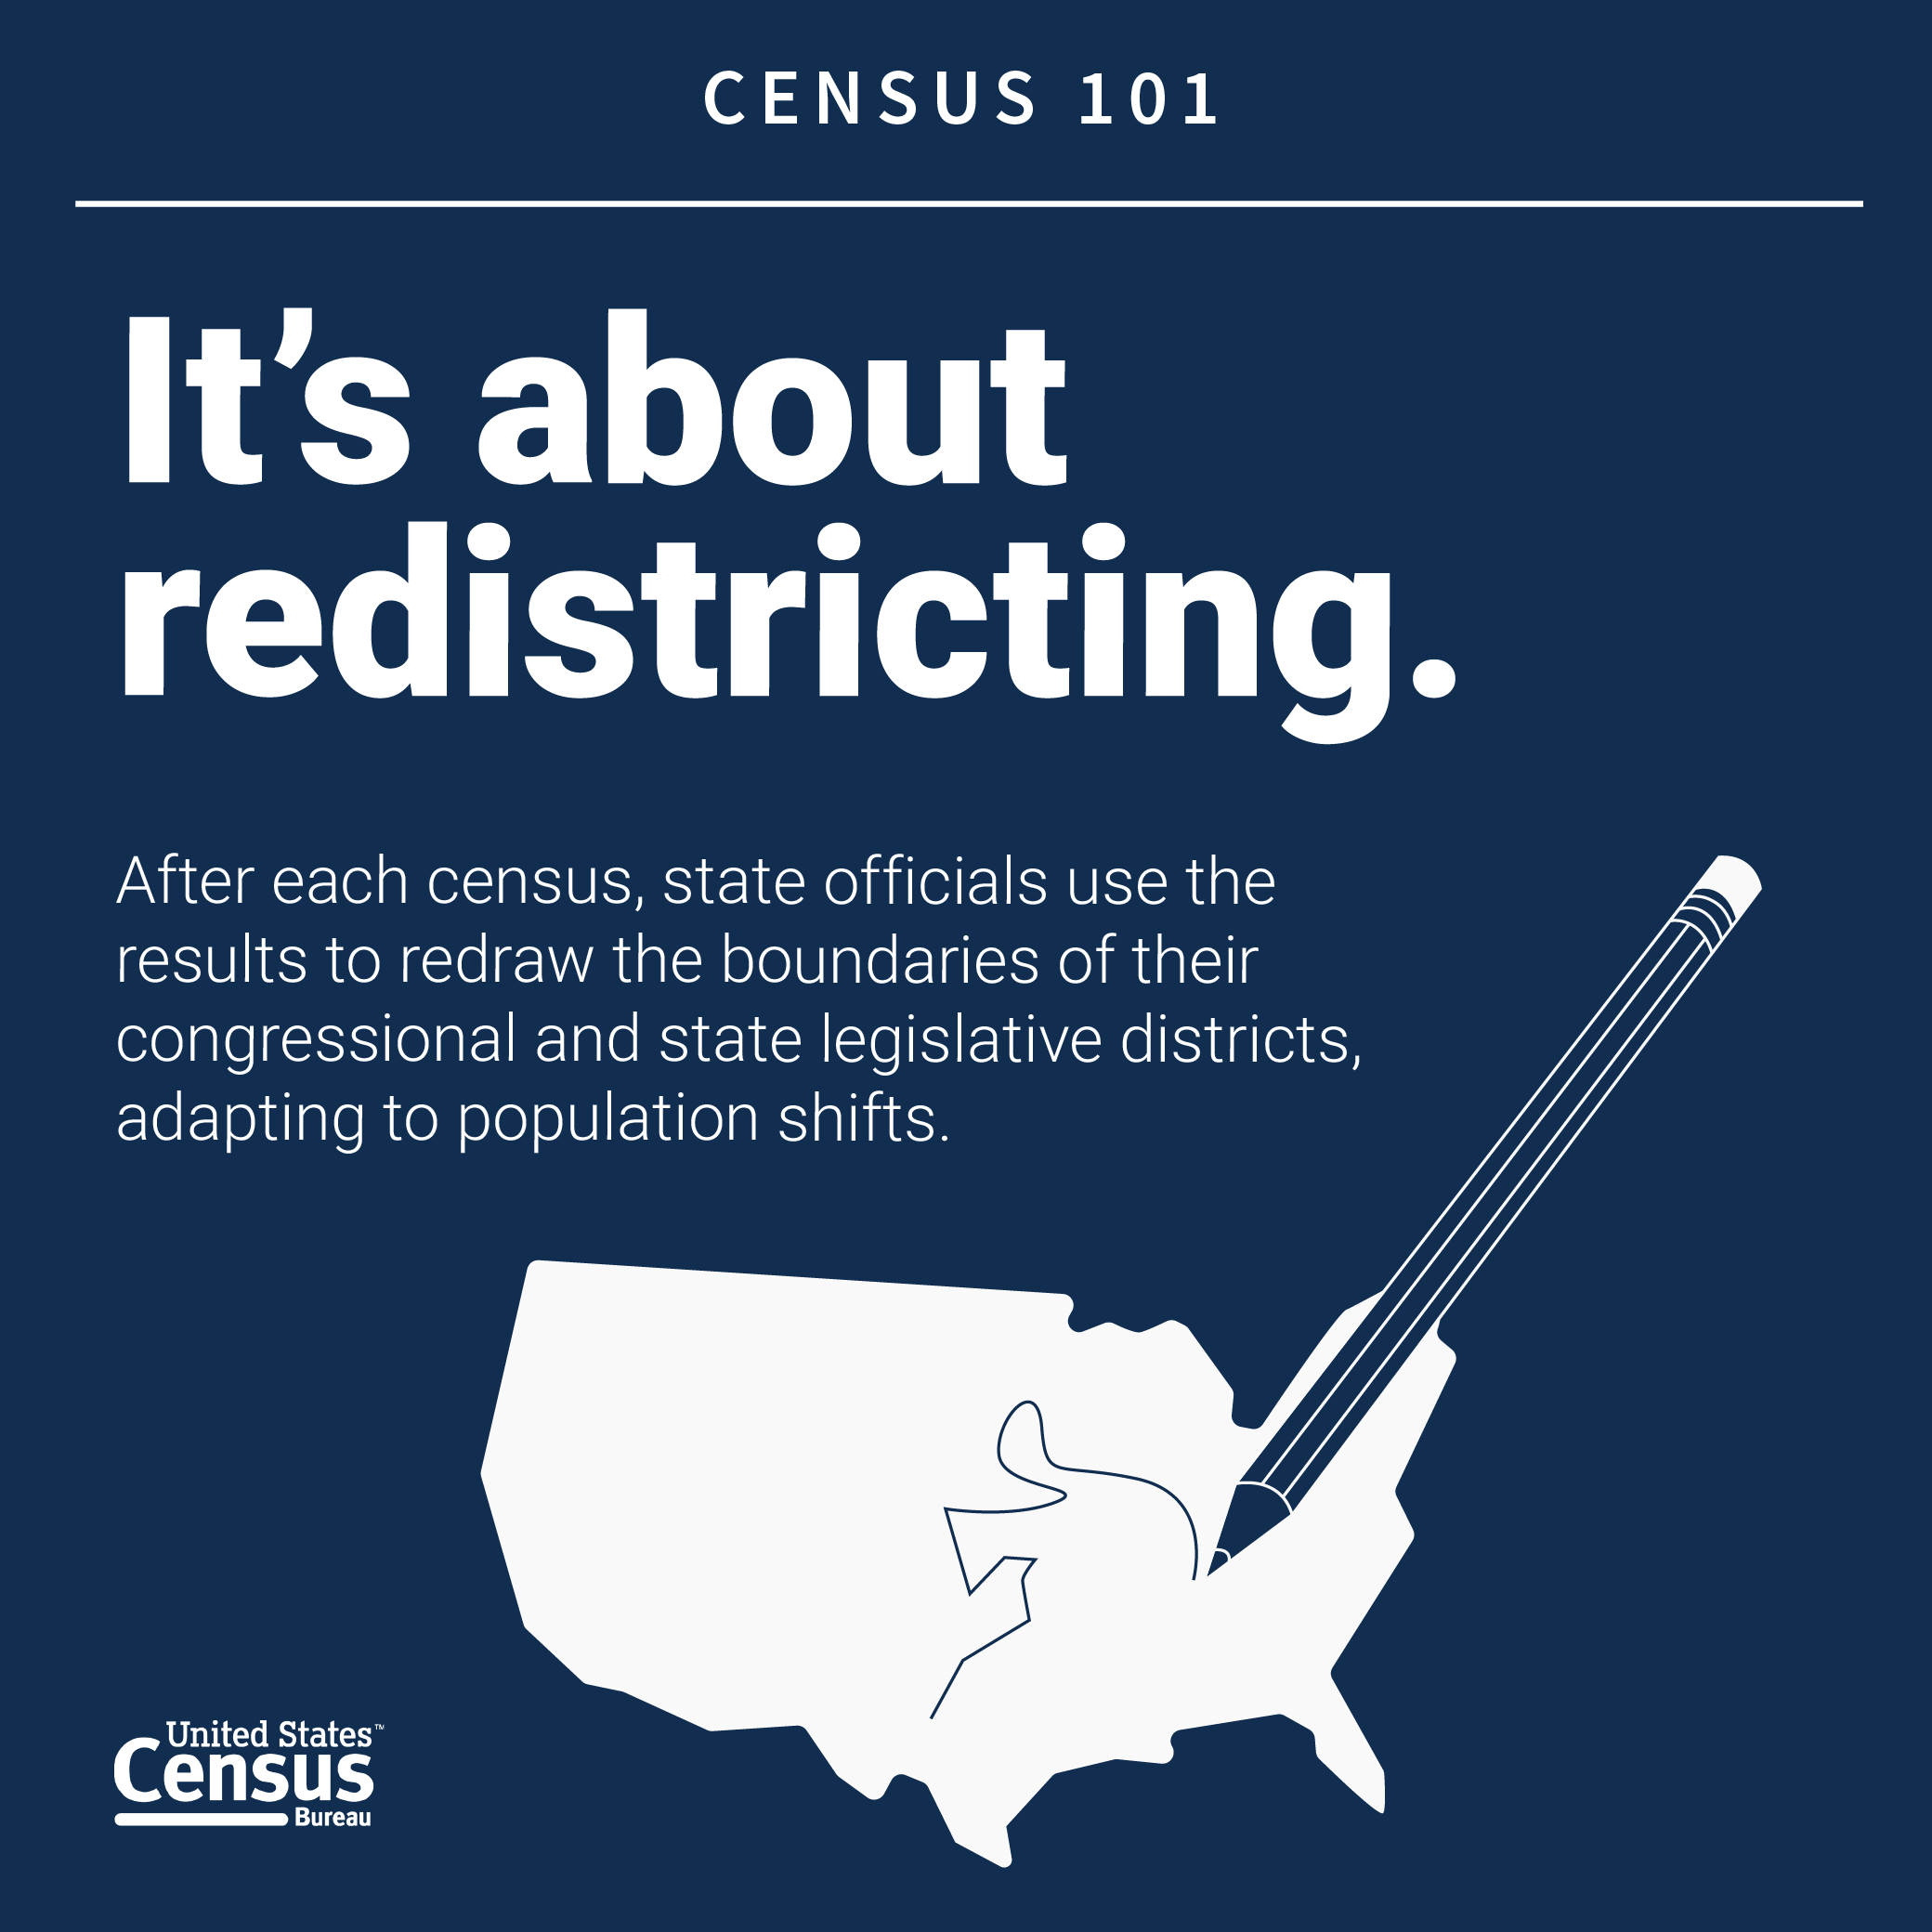 Promotional Materials - Census 2020 Resources for Oregon Libraries ...